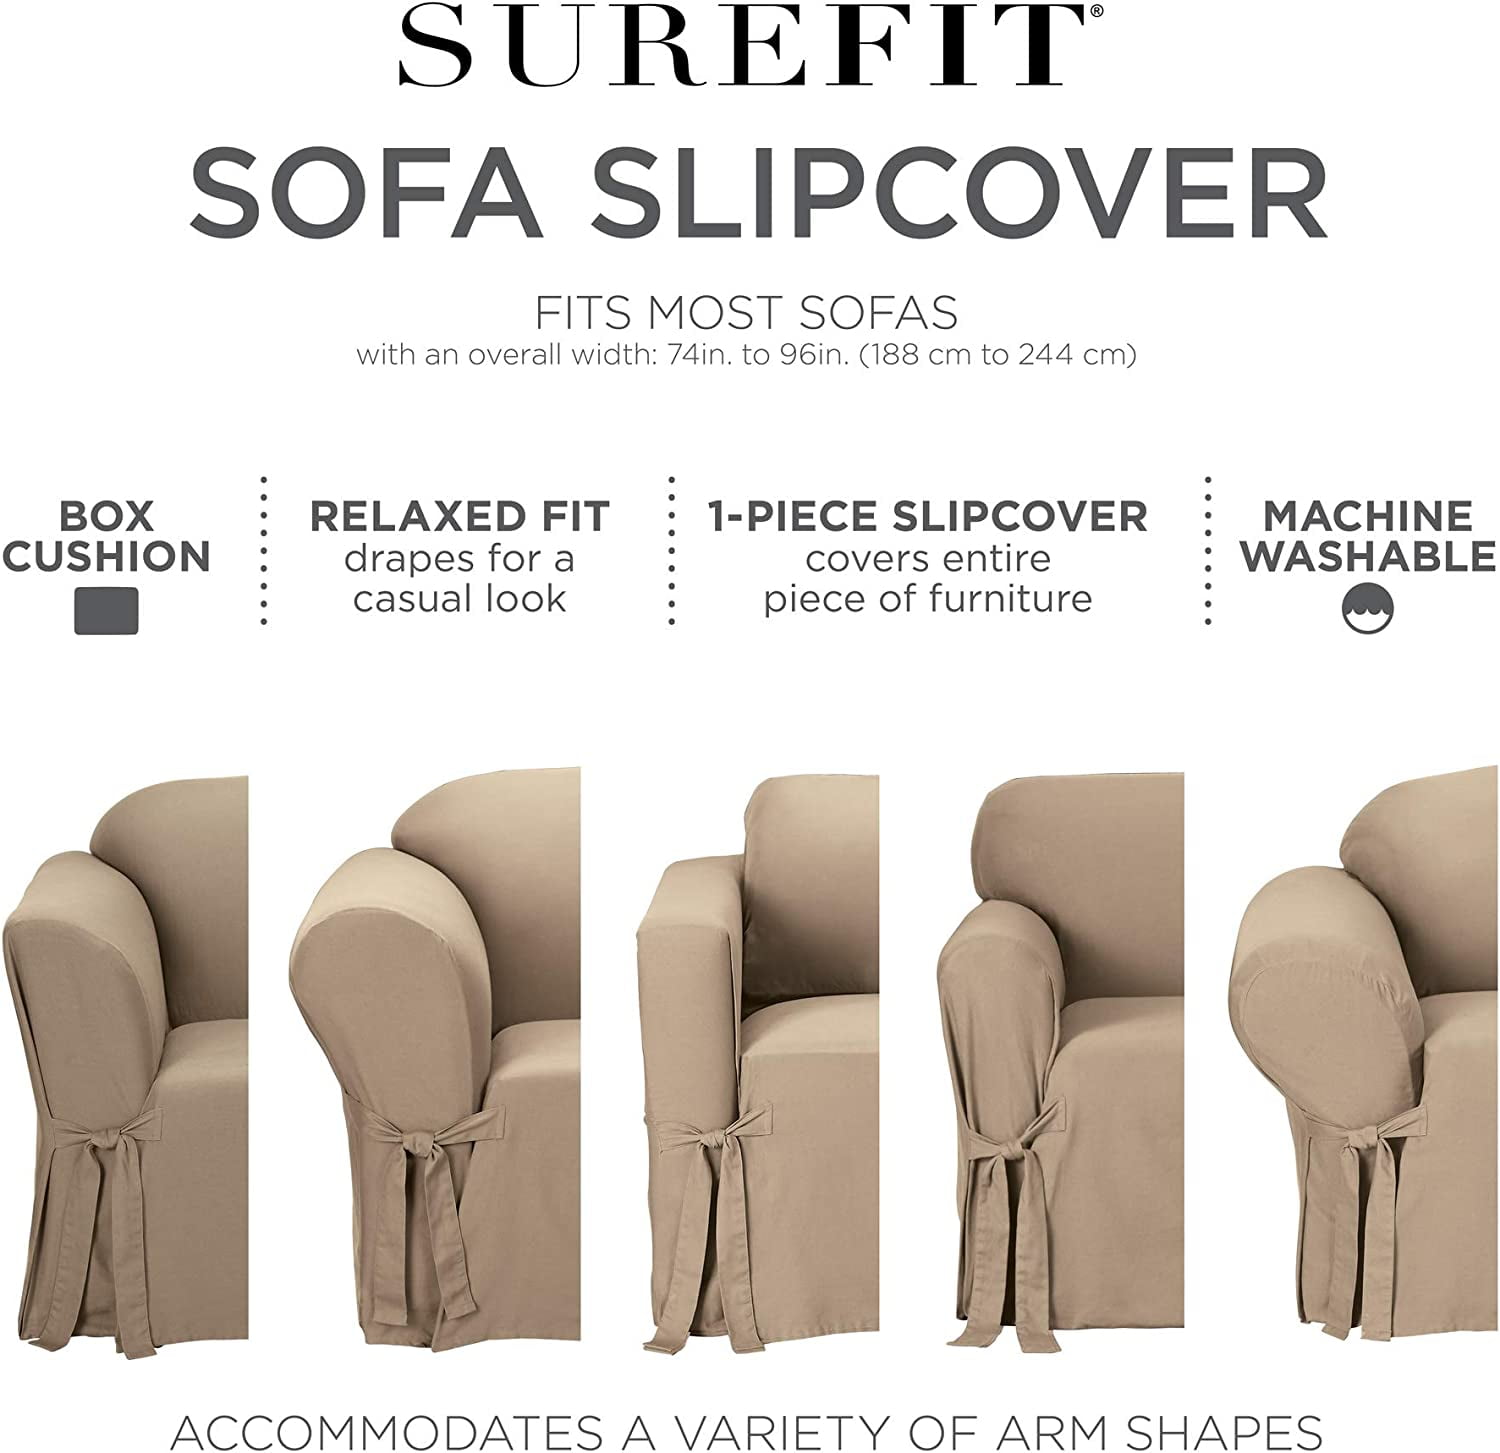 SureFit Duck Sofa One Piece Slipcover, Relaxed Woven Fit, 100